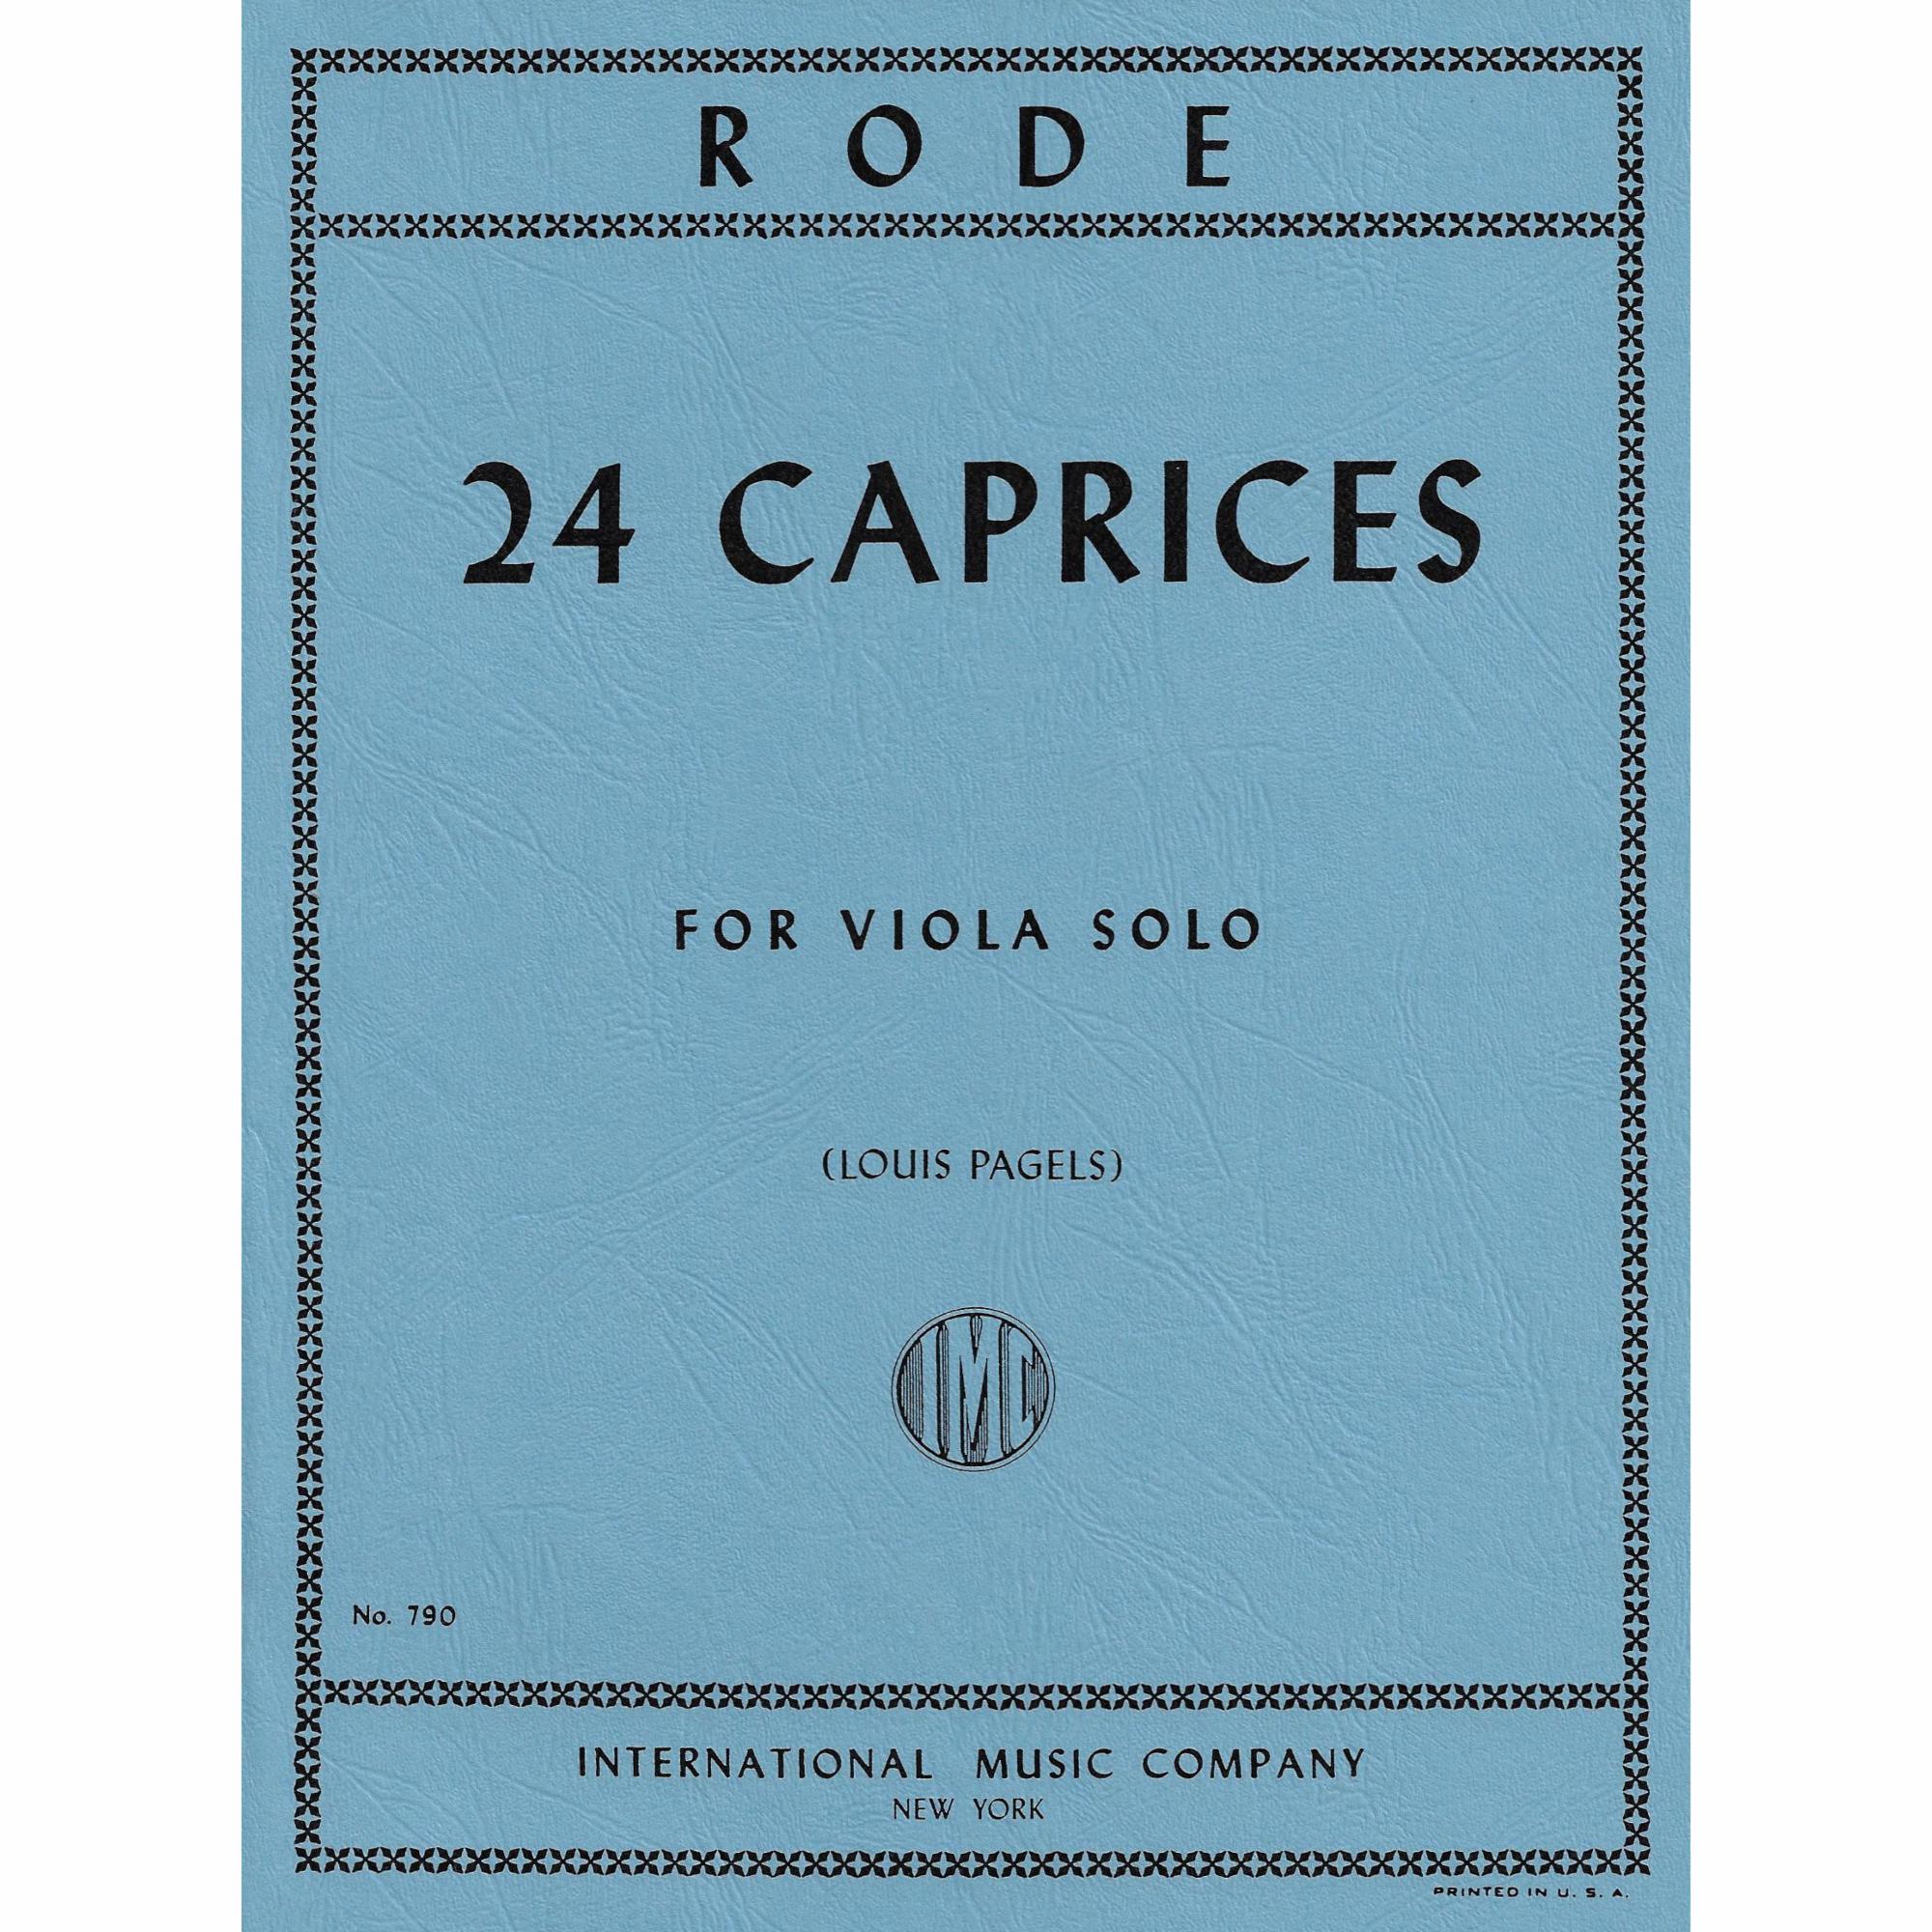 Rode -- 24 Caprices for Viola